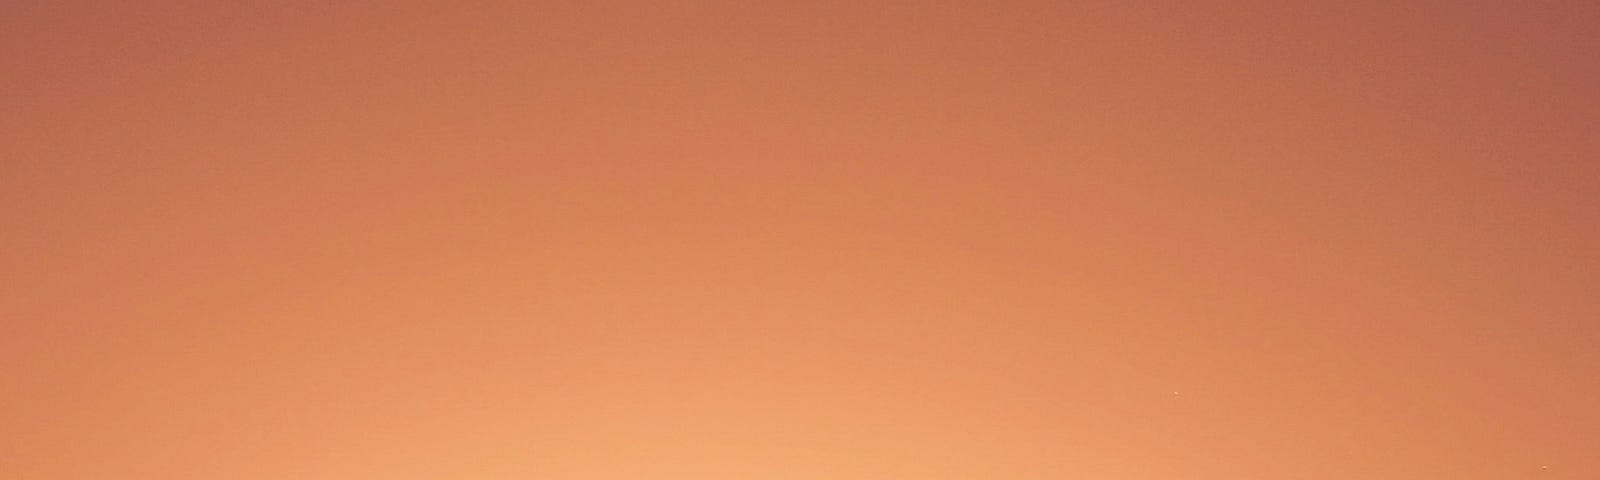 woman with fist in the air in resistance on an orange background of sunset